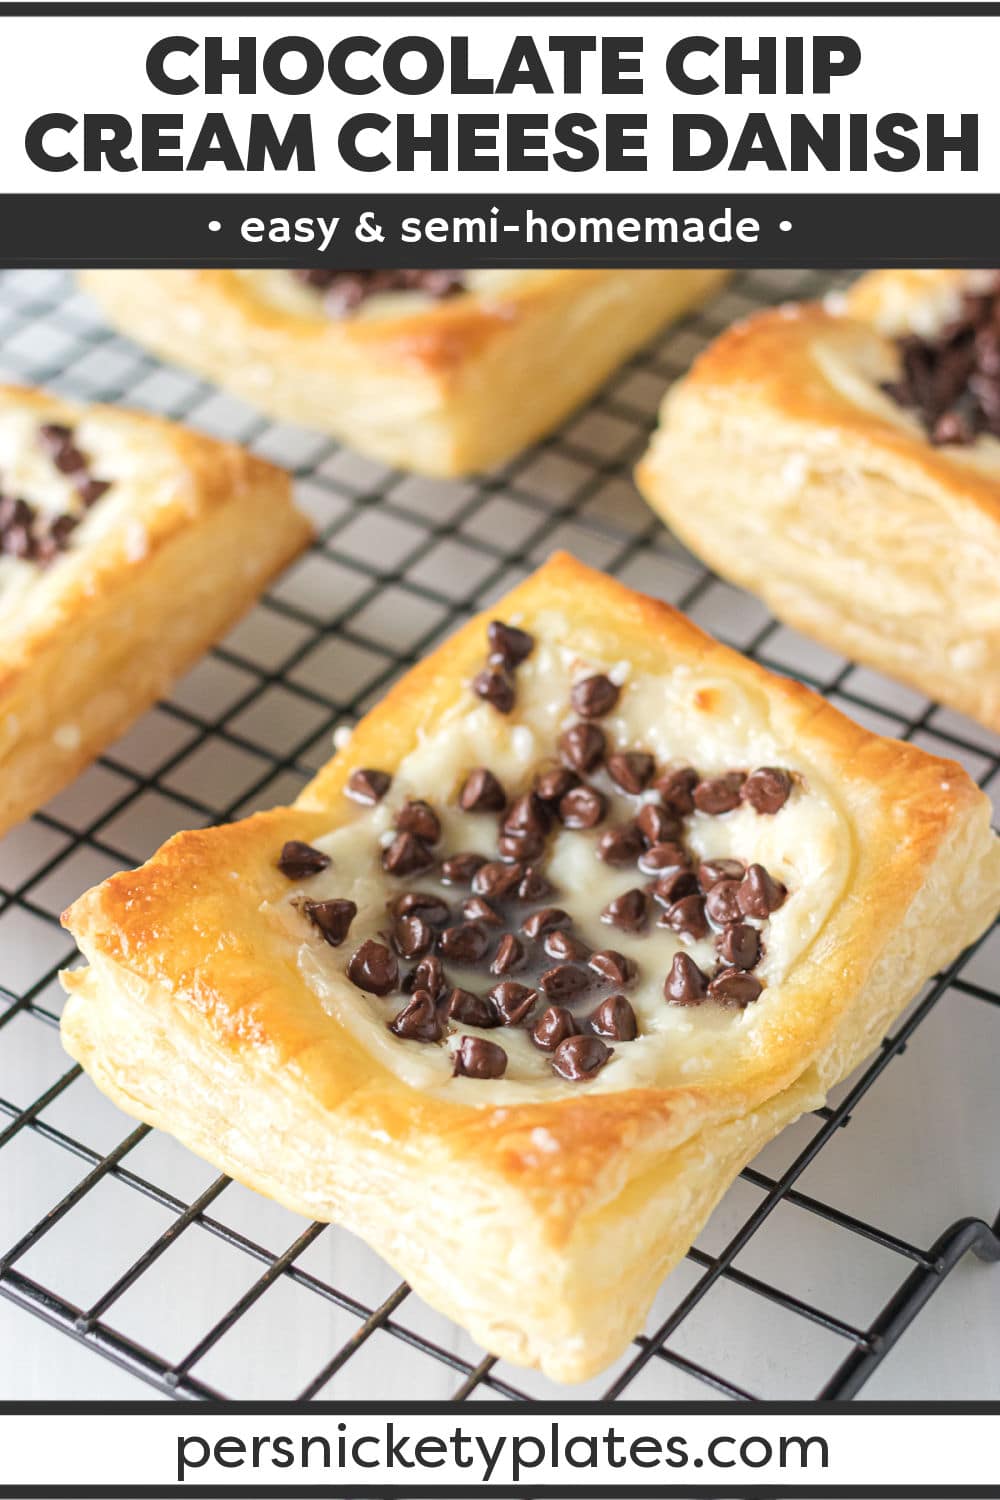 These easy Chocolate Chip Cream Cheese Danishes made with puff pastry are the perfect combination of flaky, buttery crust with a luscious cream cheese filling topped with gooey chocolate chips and a simple glaze. Ideal for breakfast on the go, as an afternoon snack, or as a dessert for your weekend brunch table. | www.persnicketyplates.com